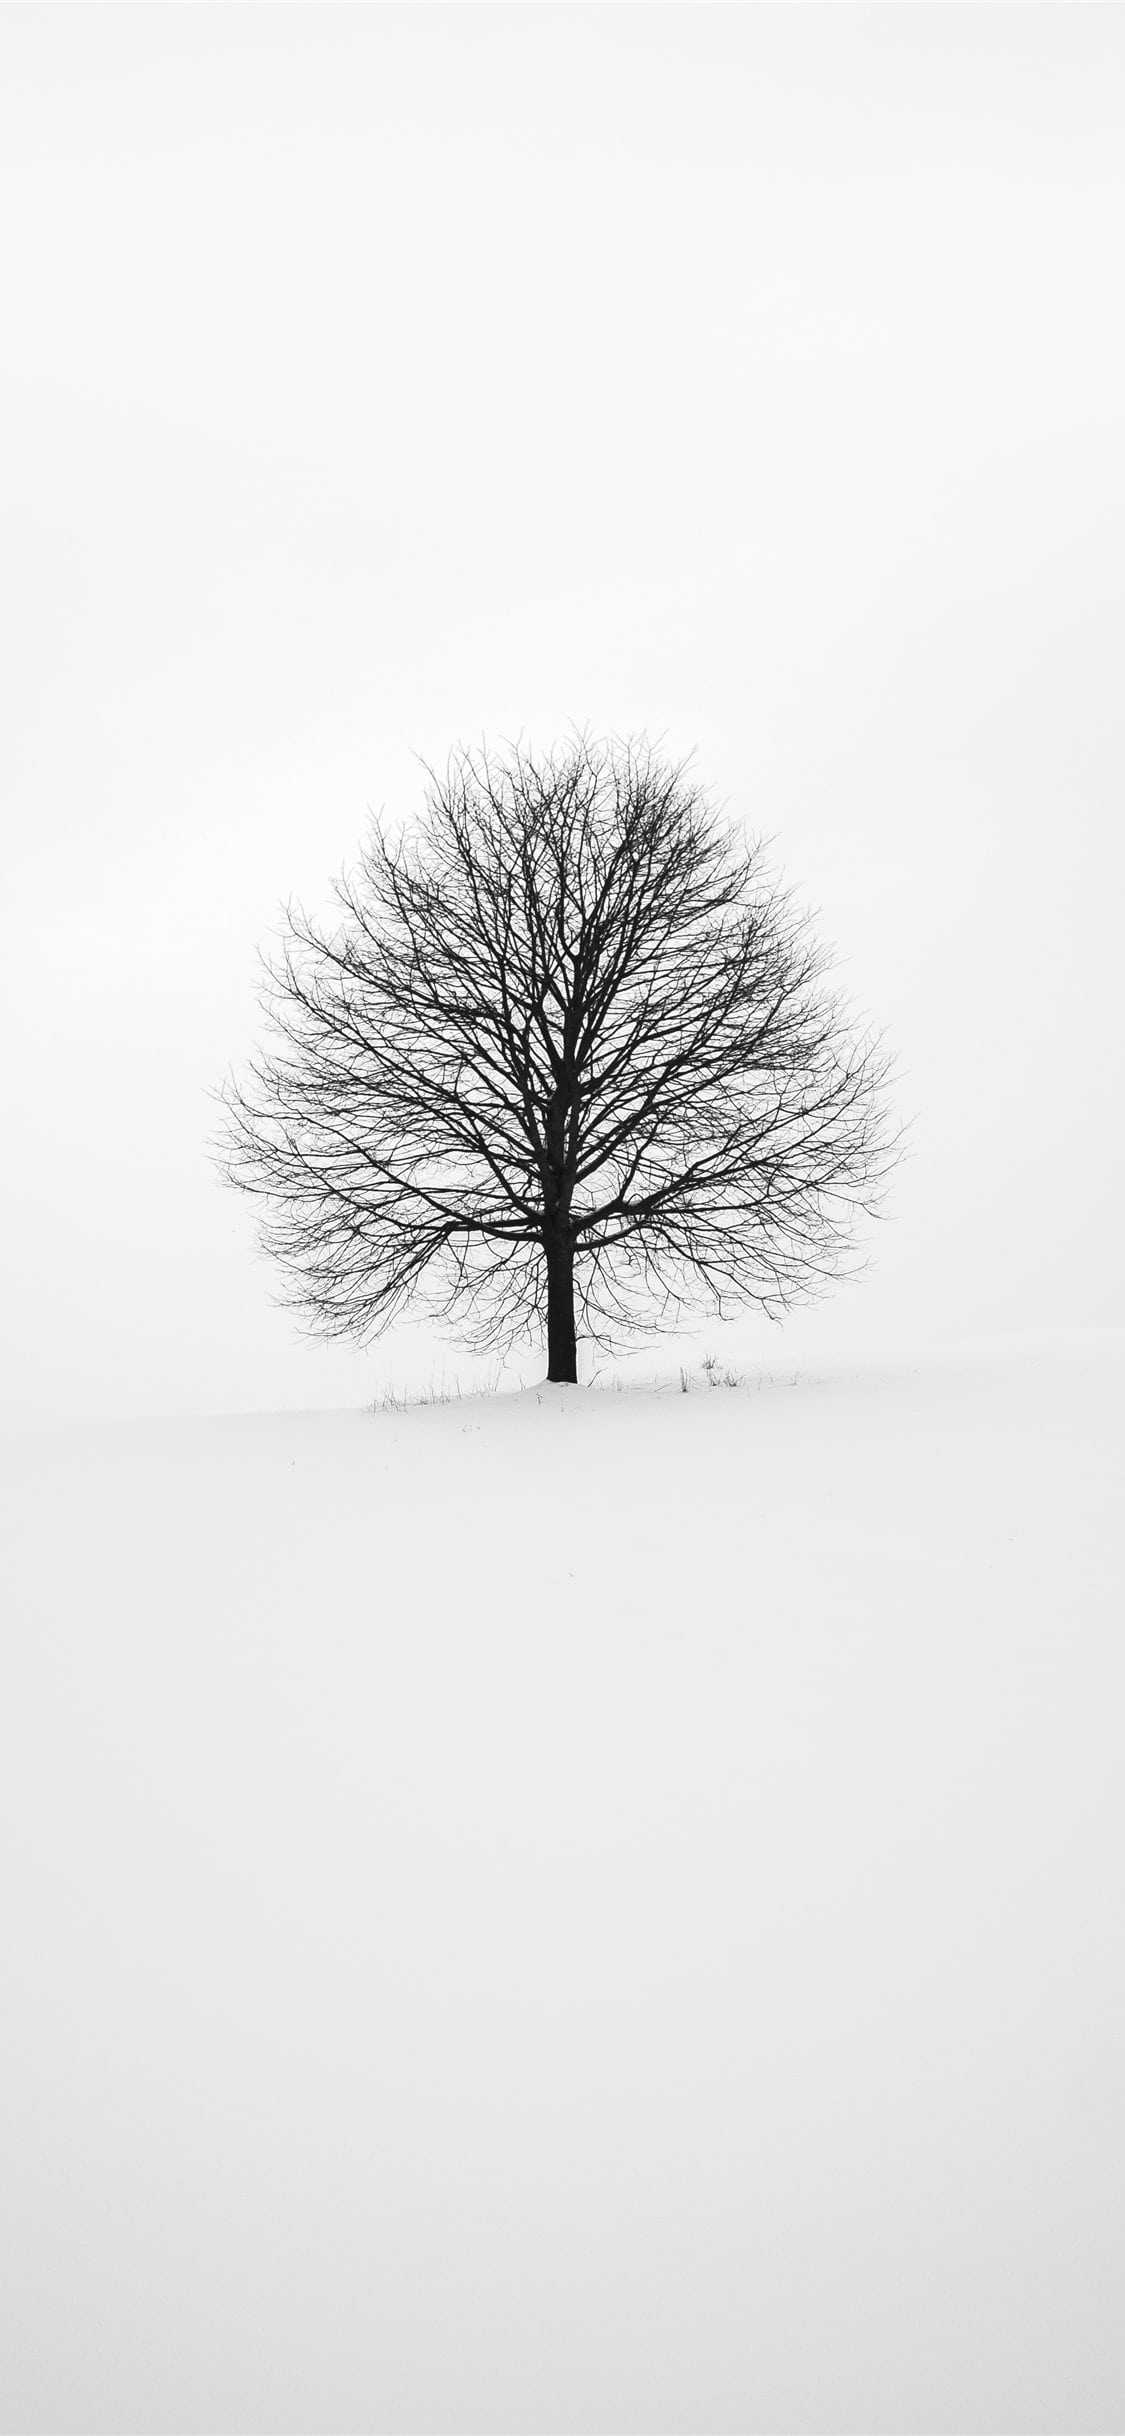 A single tree in the middle of snow - White